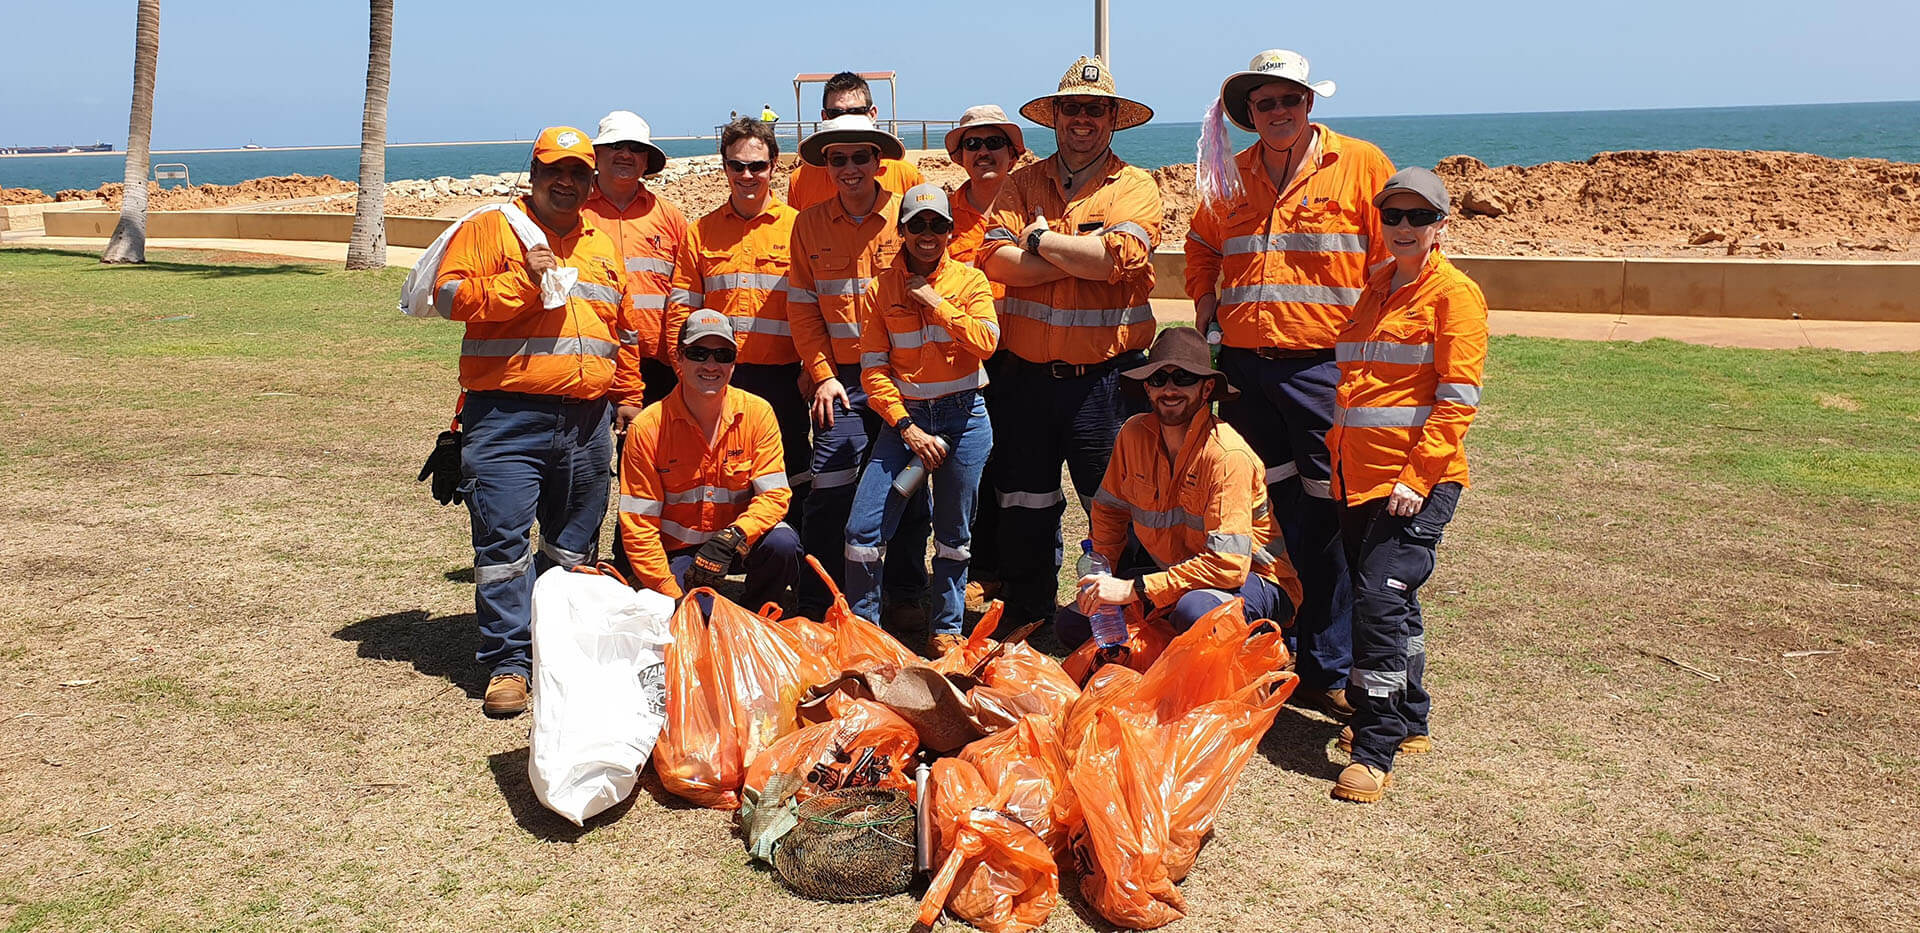 Volunteers smiling after collecting rubbish